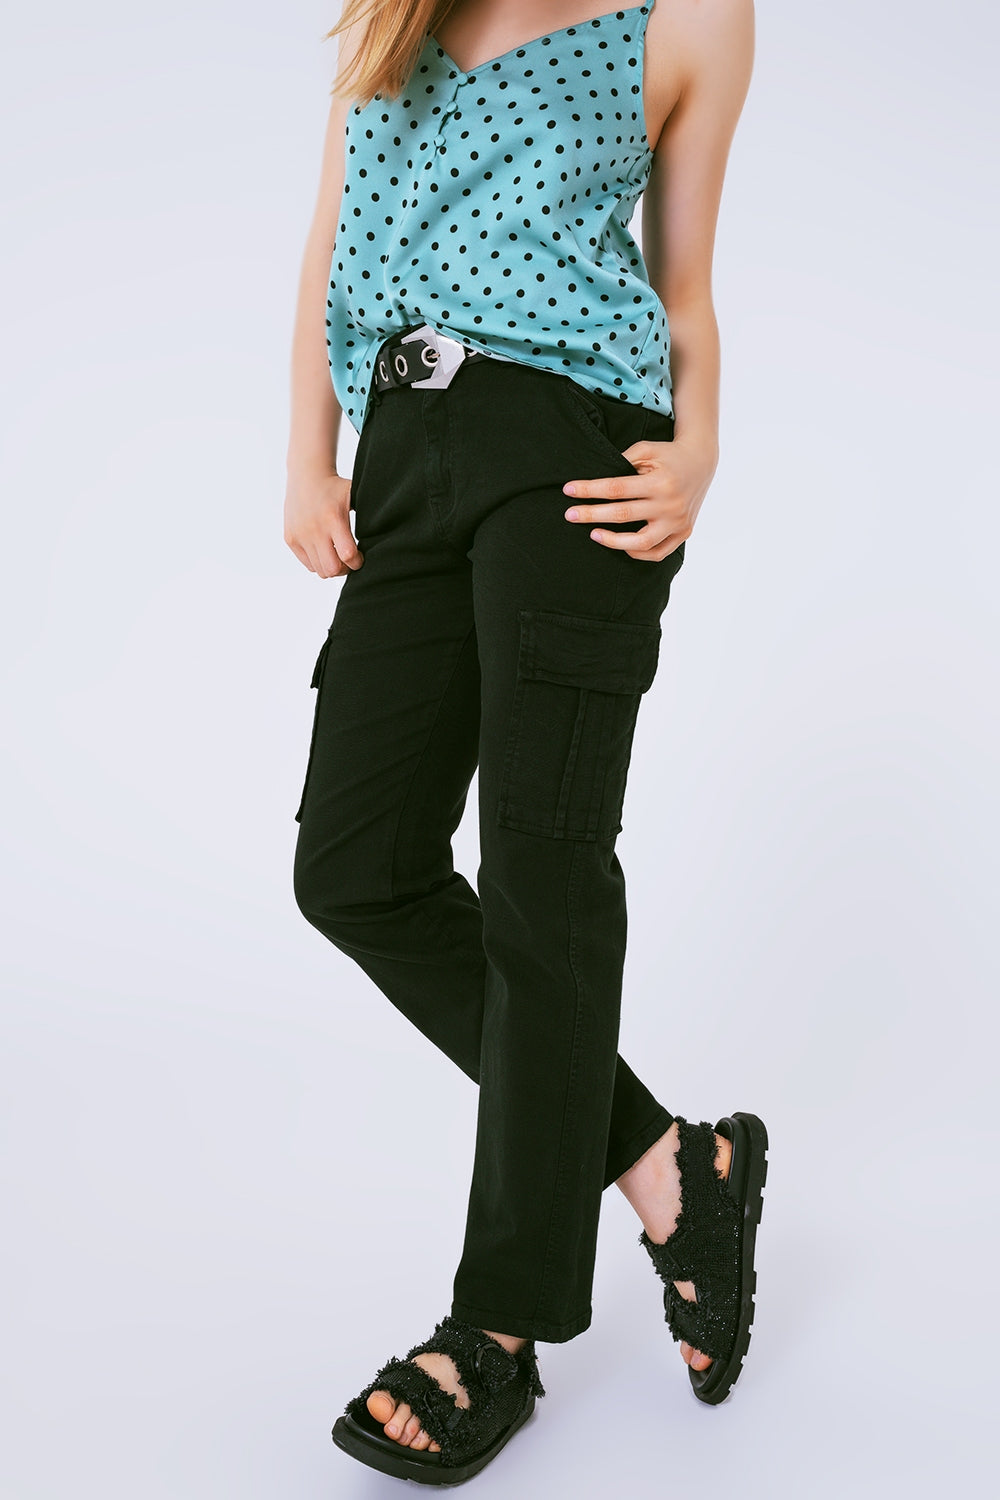 Q2 Relaxed cargo pants in black